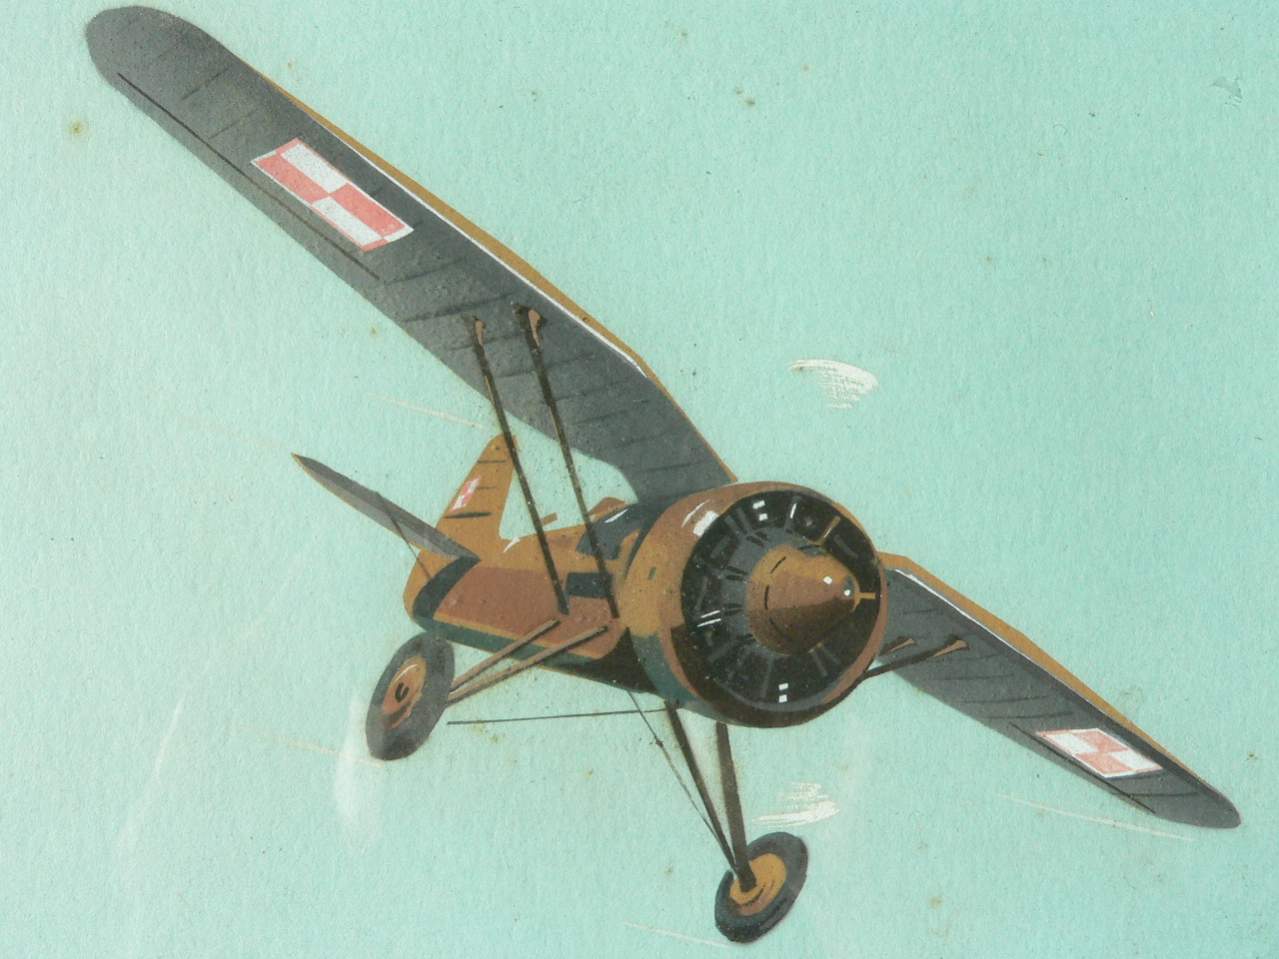 Wartime Polish aviation paintings found in England